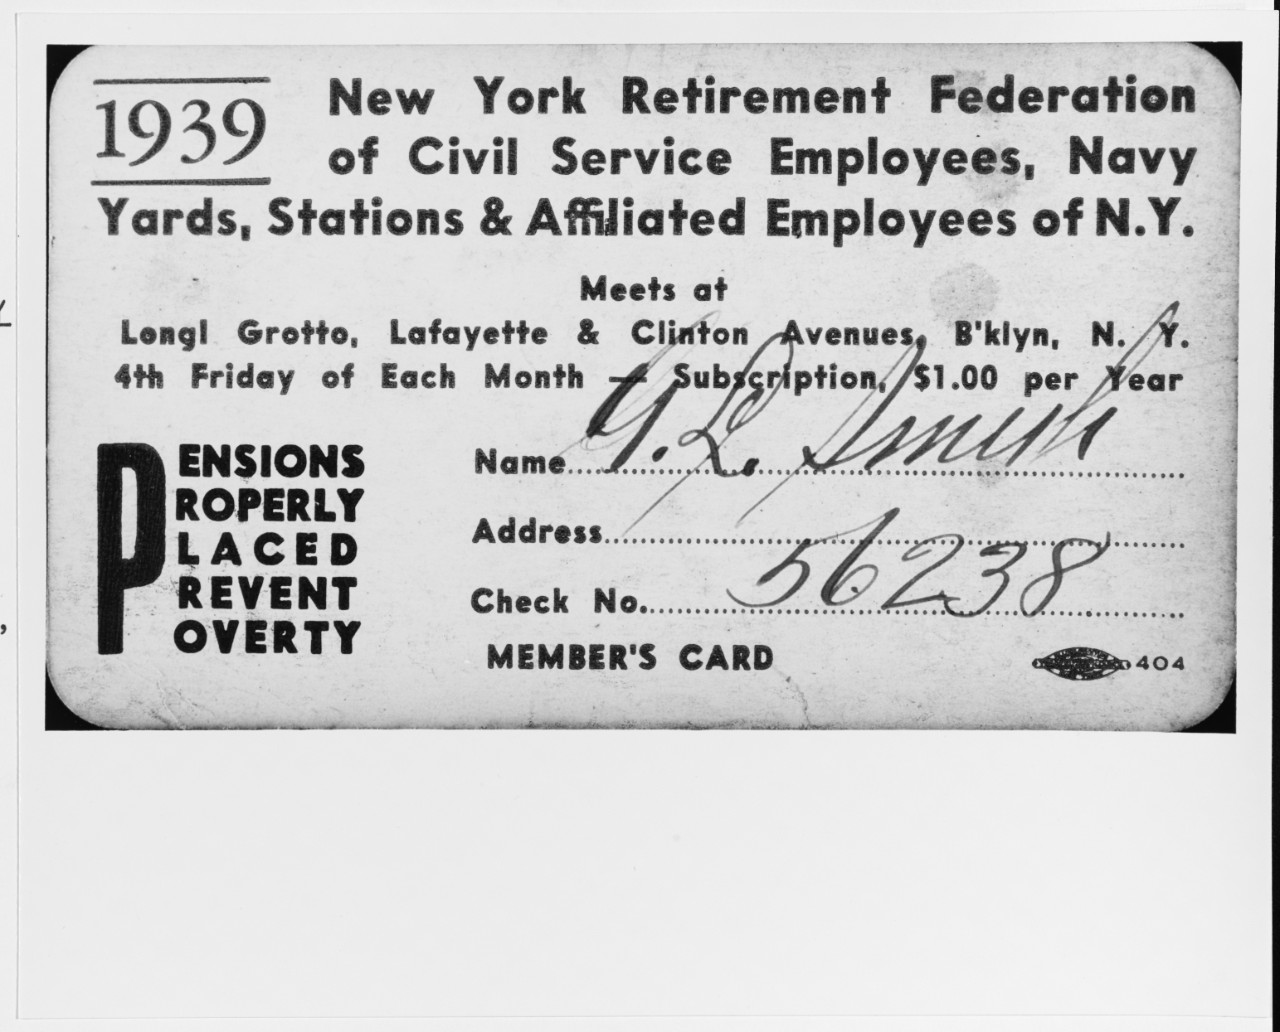 New York Retirement Federation of Civil Service Employees, Navy Yards, Stations and Affiliated Employees of New York